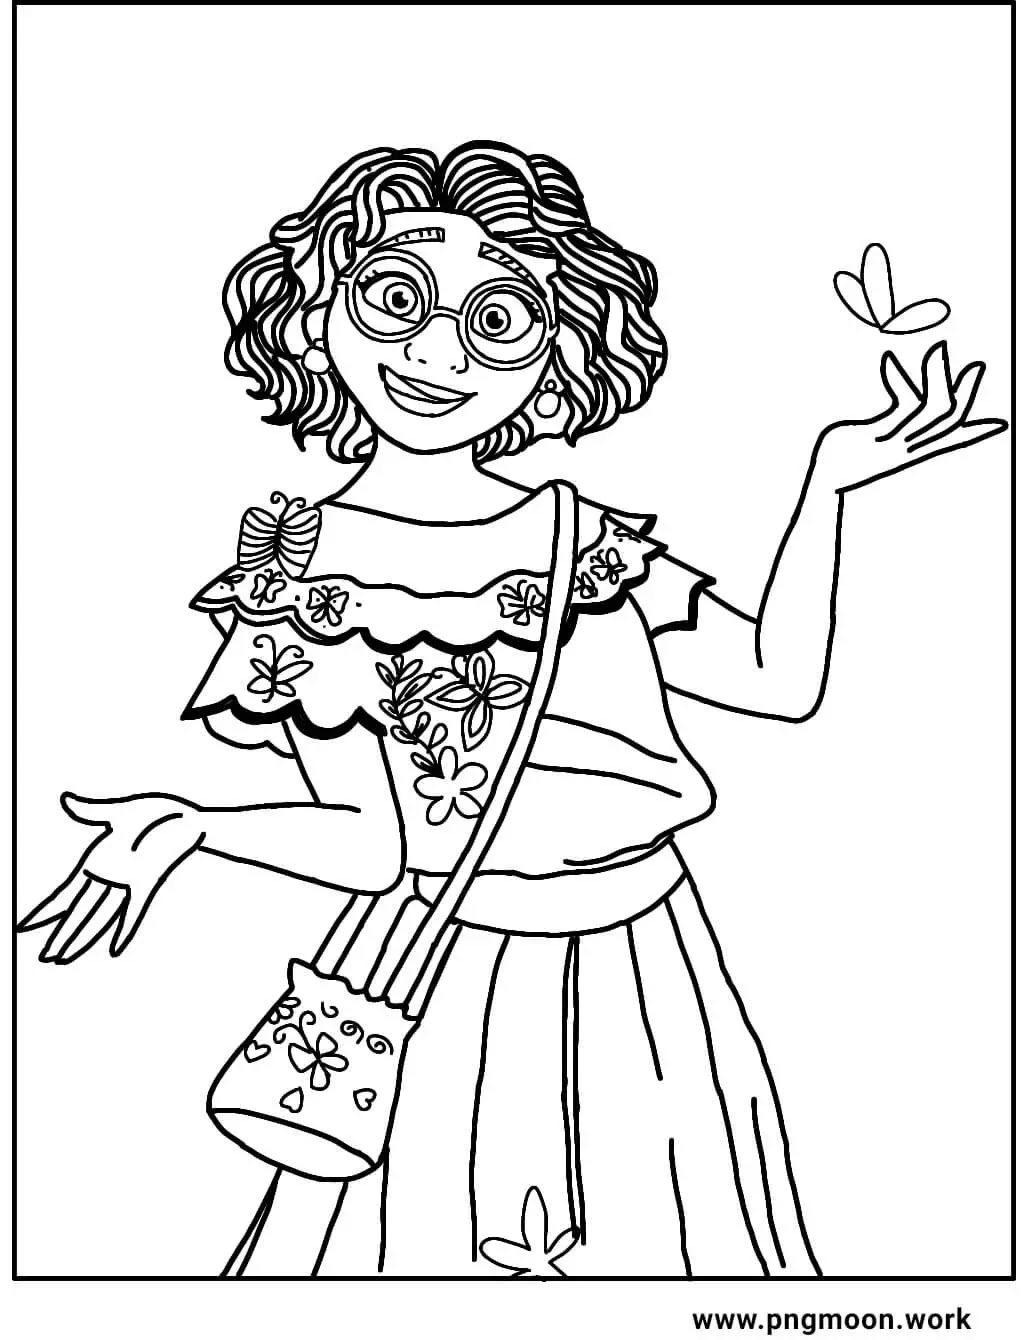 Encanto Coloring Pages - Coloring Home